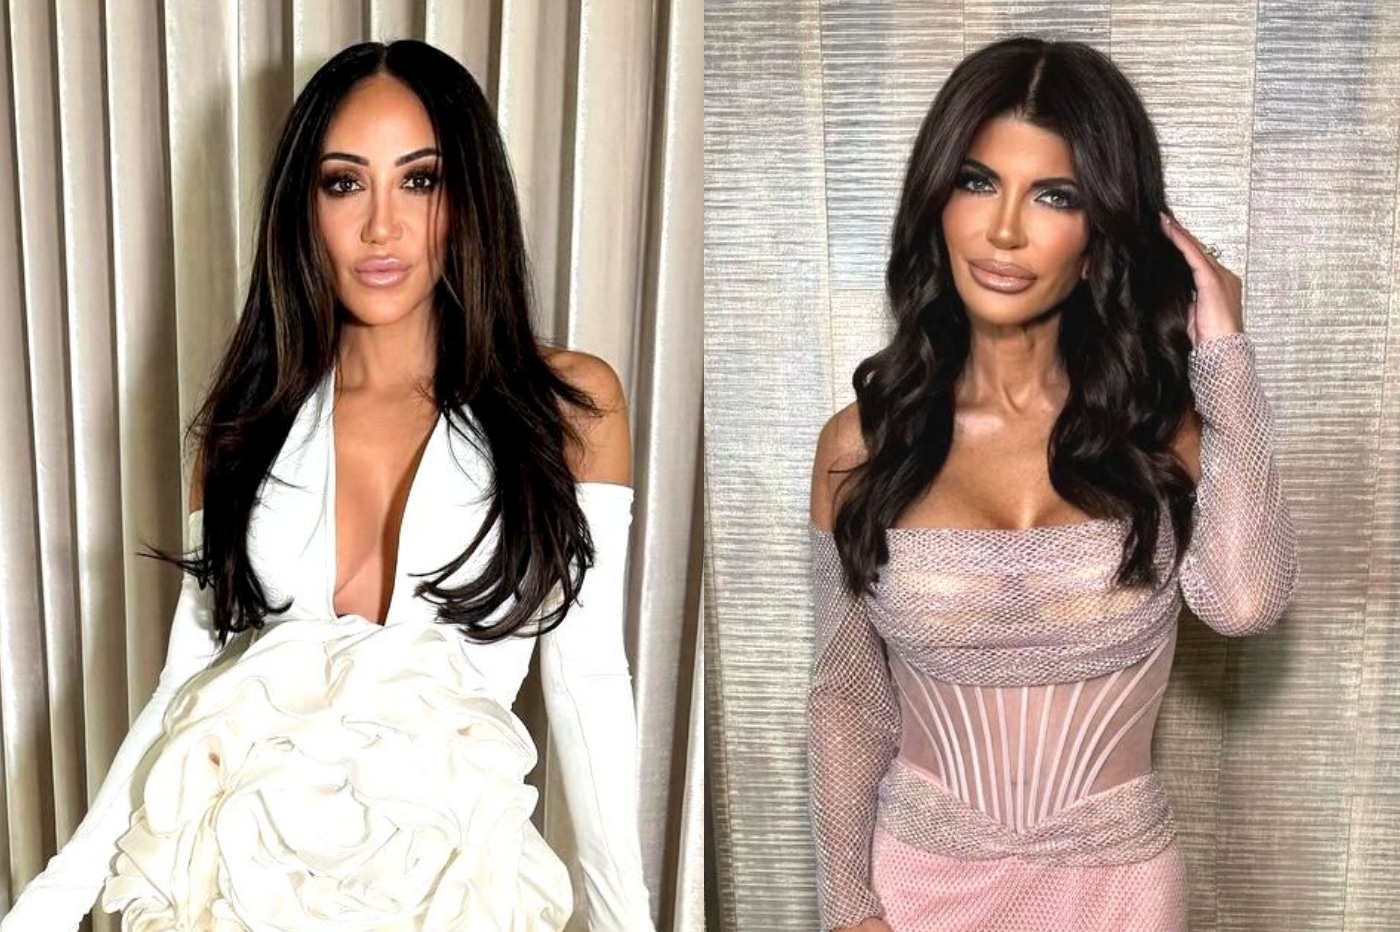 RHONJ Star Melissa Gorga Accuses Teresa Giudice of Takedown Plot, Teases "Dirty" Finale, and Reacts to Jennifer Aydin's Blogger Drama, Plus She Shades Jackie as Weak, Talks Future of Show, & Live Viewing Thread